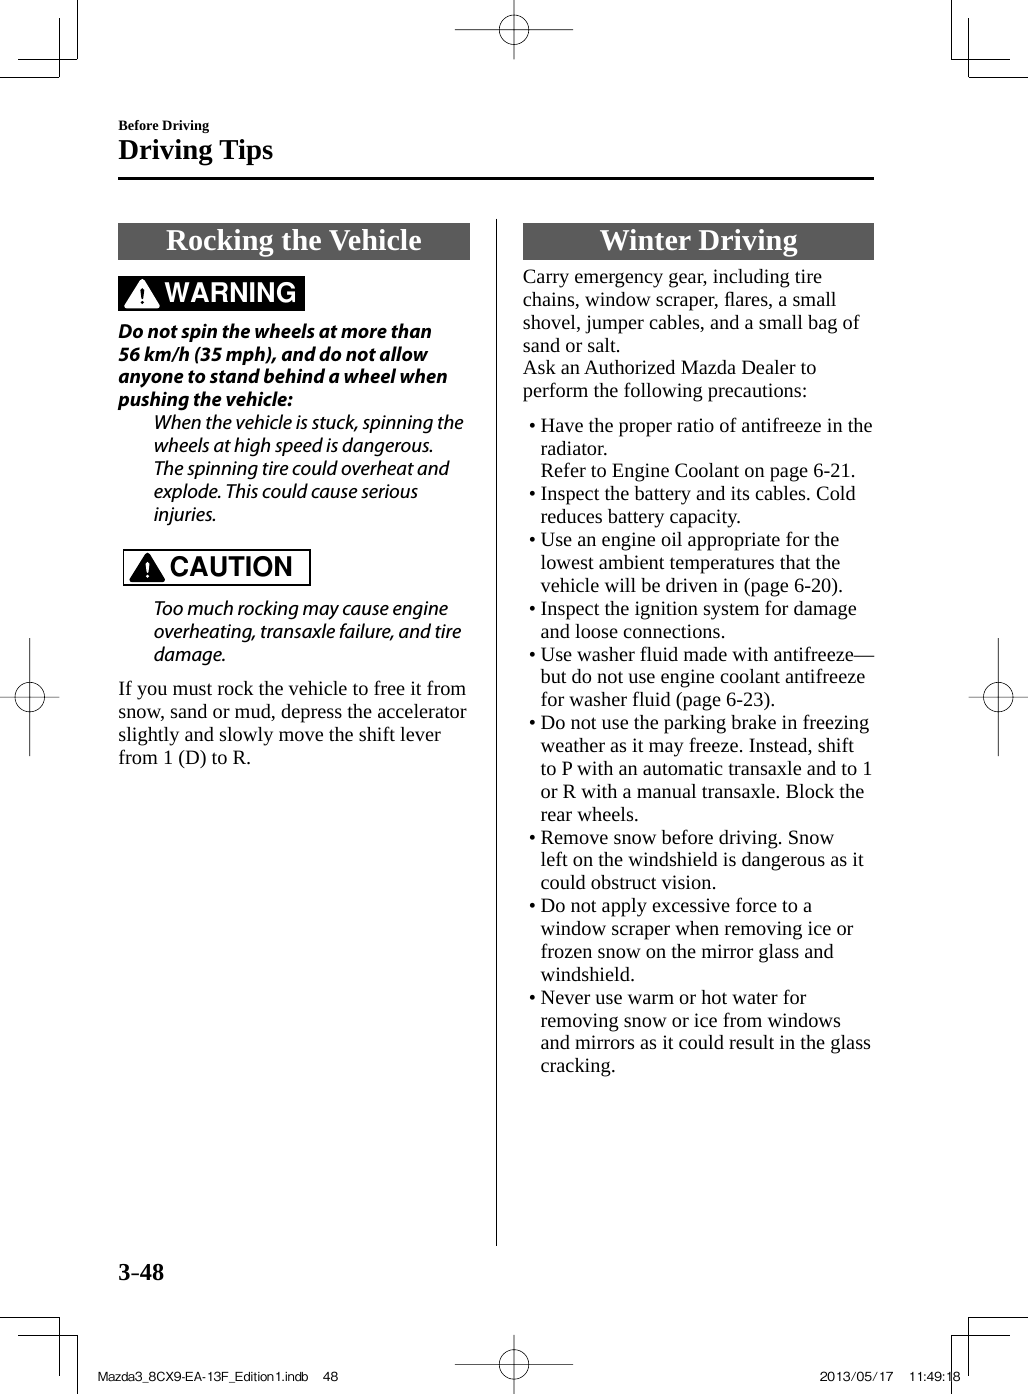 3–48Before DrivingDriving Tips Rocking  the  Vehicle               WARNING    Do not spin the wheels at more than 56 km/h (35 mph), and do not allow anyone to stand behind a wheel when pushing the vehicle:  When the vehicle is stuck, spinning the wheels at high speed is dangerous. The spinning tire could overheat and explode. This could cause serious injuries.      CAUTION    Too much rocking may cause engine overheating, transaxle failure, and tire damage.     If you must rock the vehicle to free it from snow, sand or mud, depress the accelerator slightly and slowly move the shift lever from 1 (D) to R. Winter  Driving              Carry  emergency  gear,  including  tire chains, window scraper, ﬂ ares, a small shovel, jumper cables, and a small bag of sand or salt.  Ask an Authorized Mazda Dealer to perform the following precautions:   •       Have the proper ratio of antifreeze in the radiator.    Refer to Engine Coolant on page  6-21 .•        Inspect  the  battery  and  its  cables.  Cold reduces battery capacity.•        Use  an  engine  oil  appropriate  for  the lowest ambient temperatures that the vehicle will be driven in (page  6-20 ).•        Inspect  the  ignition  system  for  damage and loose connections.•        Use  washer  fluid  made  with  antifreeze—but do not use engine coolant antifreeze for washer fluid (page  6-23 ).•       Do not use the parking brake in freezing weather as it may freeze. Instead, shift to P with an automatic transaxle and to 1 or R with a manual transaxle. Block the rear wheels.•        Remove  snow  before  driving.  Snow left on the windshield is dangerous as it could obstruct vision.•        Do  not  apply  excessive  force  to  a window scraper when removing ice or frozen snow on the mirror glass and windshield.•        Never  use  warm  or  hot  water  for removing snow or ice from windows and mirrors as it could result in the glass cracking.Mazda3_8CX9-EA-13F_Edition1.indb   48Mazda3_8CX9-EA-13F_Edition1.indb   48 2013/05/17   11:49:182013/05/17   11:49:18